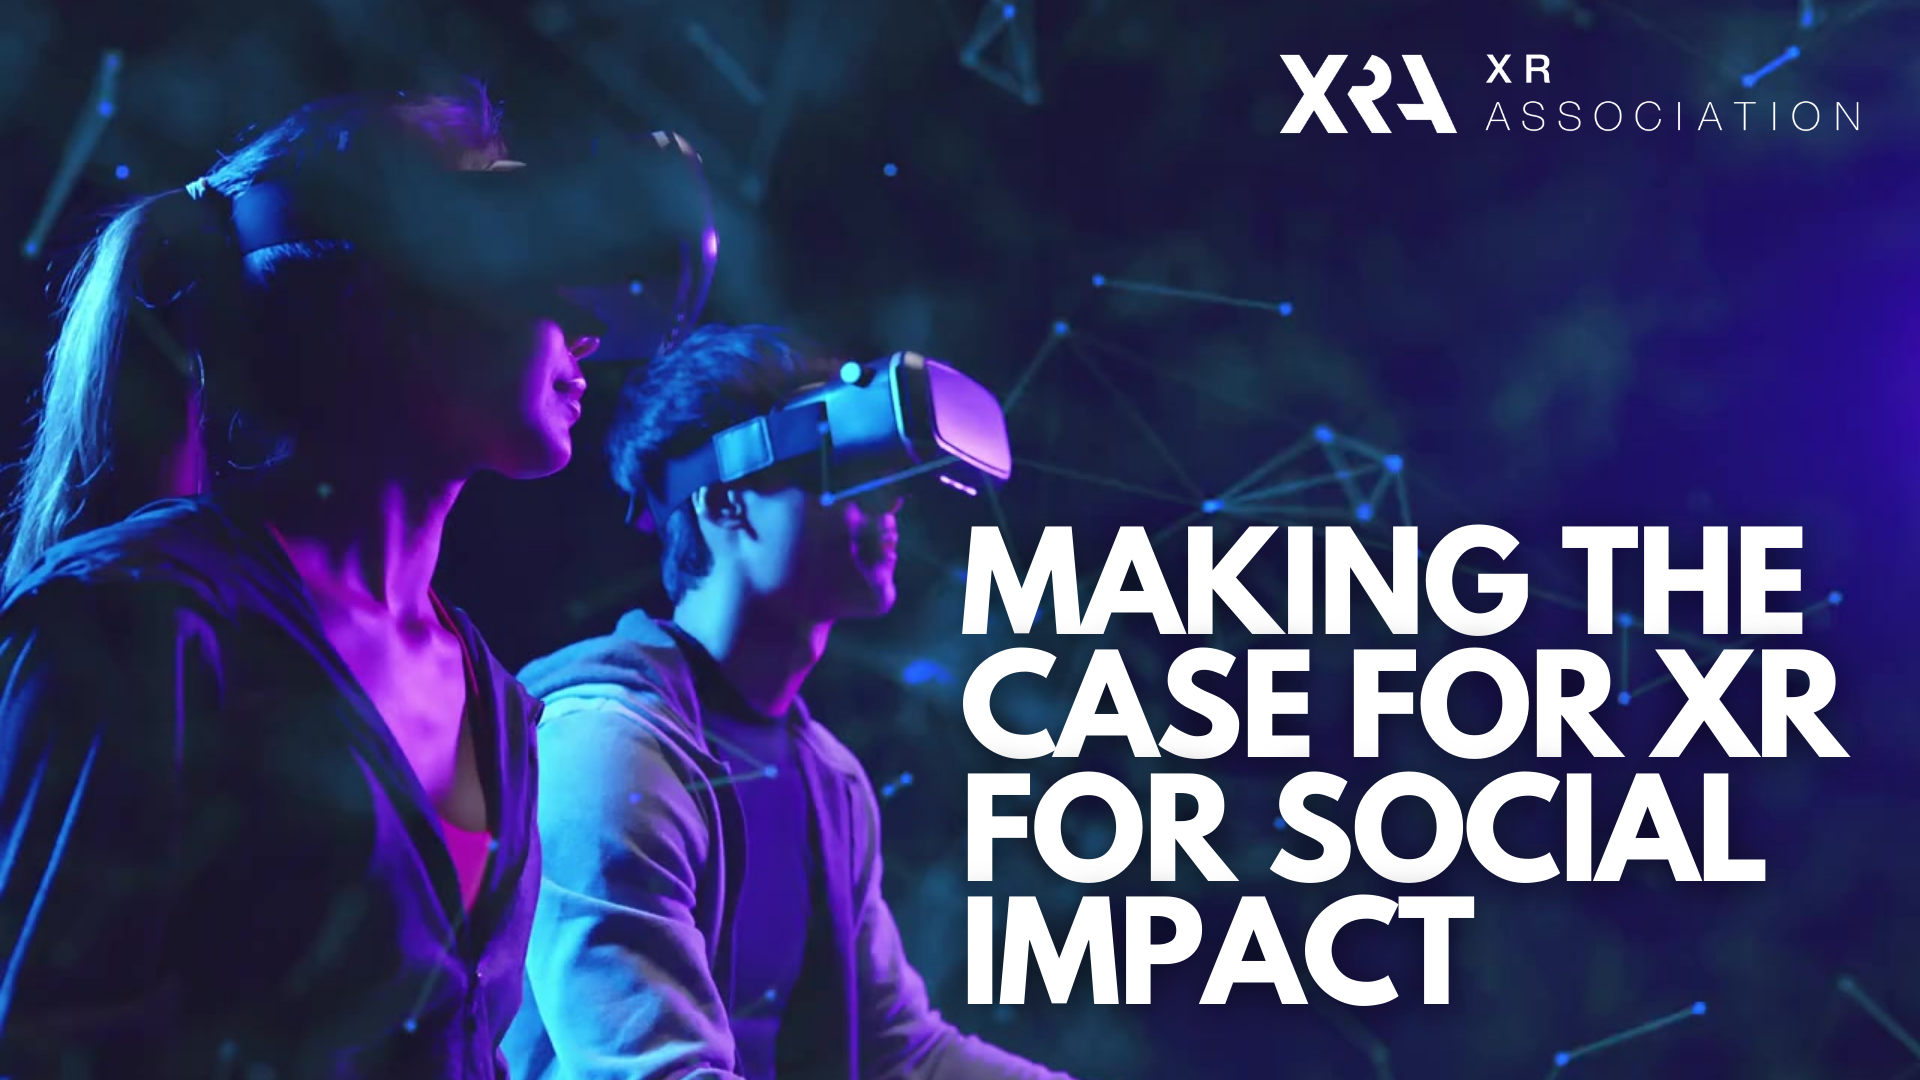 XR ASSOCIATION HOSTED LIMITLESS FUTURE WEBINAR SERIES ON XR AND SOCIAL IMPACT